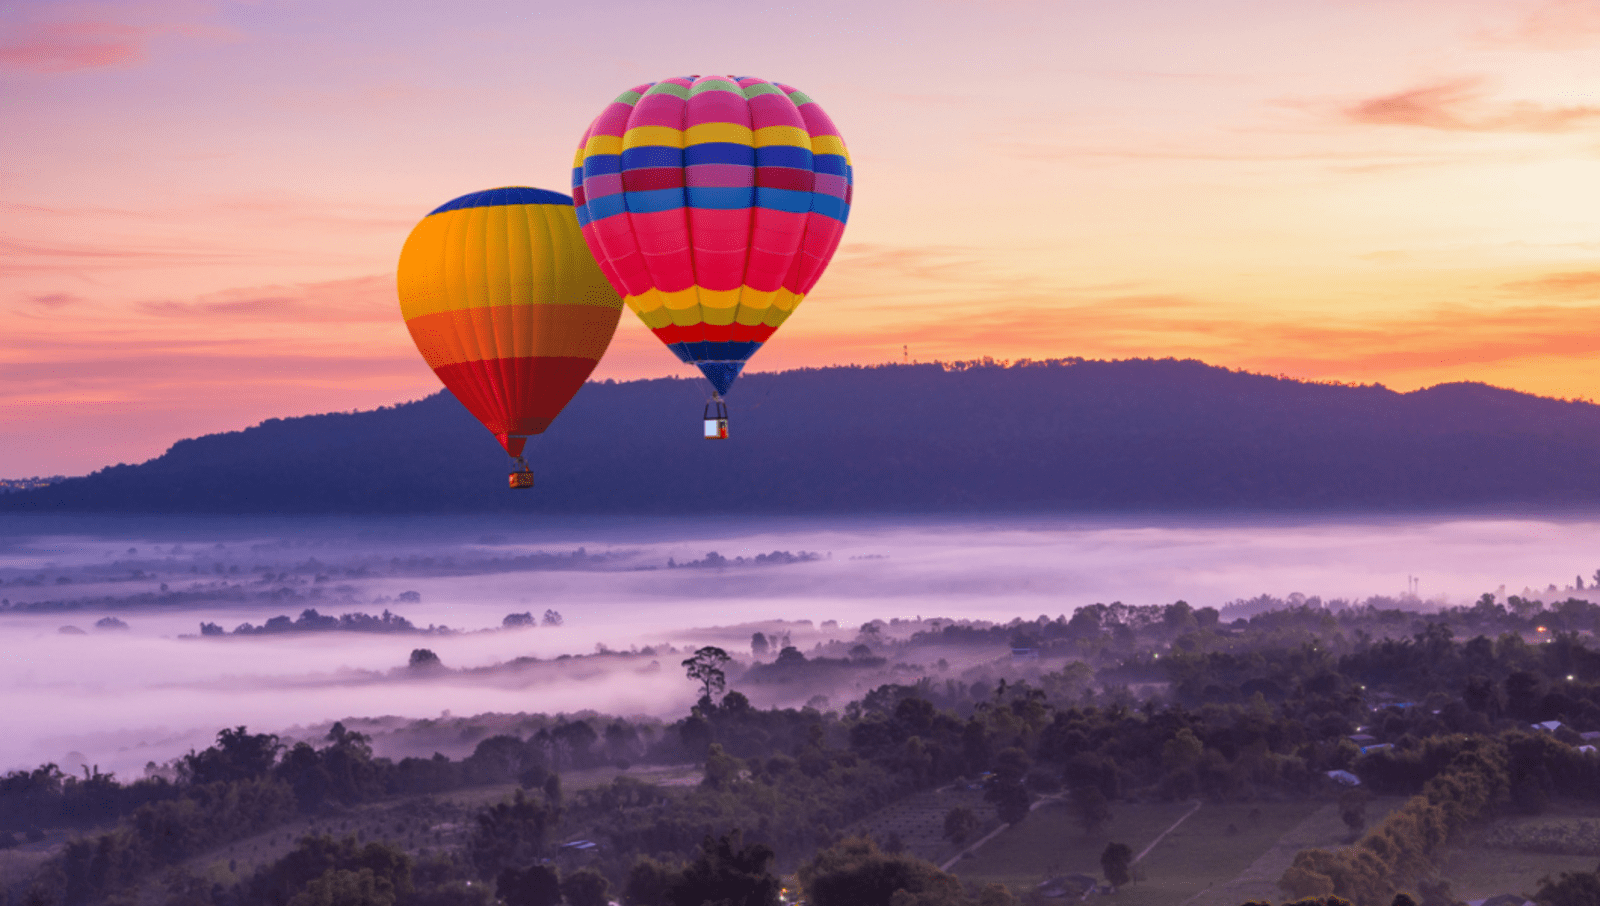 Two colourful hot air balloons flying over thailand at dusk